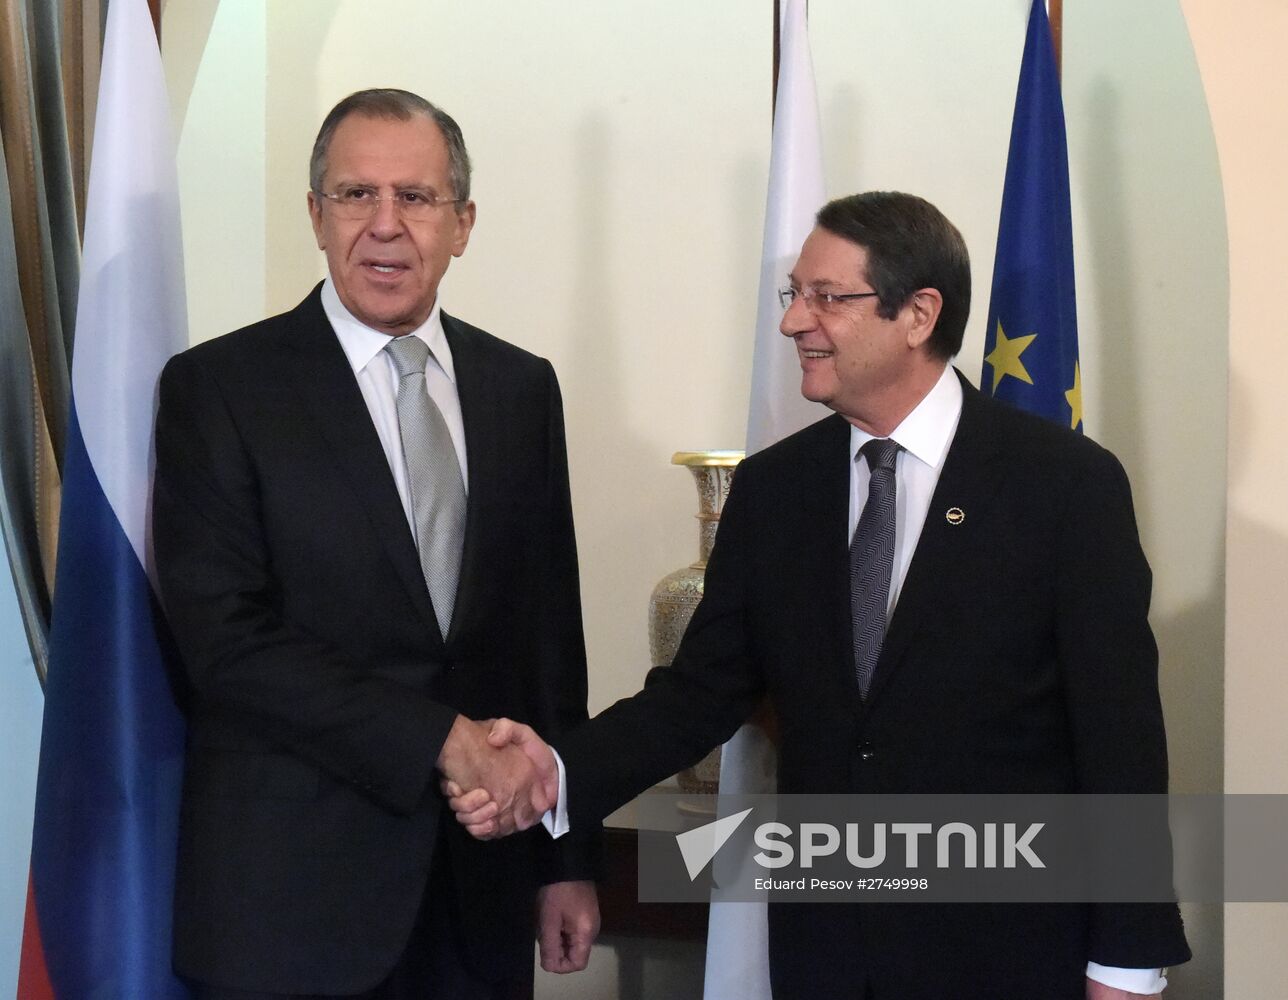 Russian Foreign Minister Sergei Lavrov's visit to Republic of Cyprus